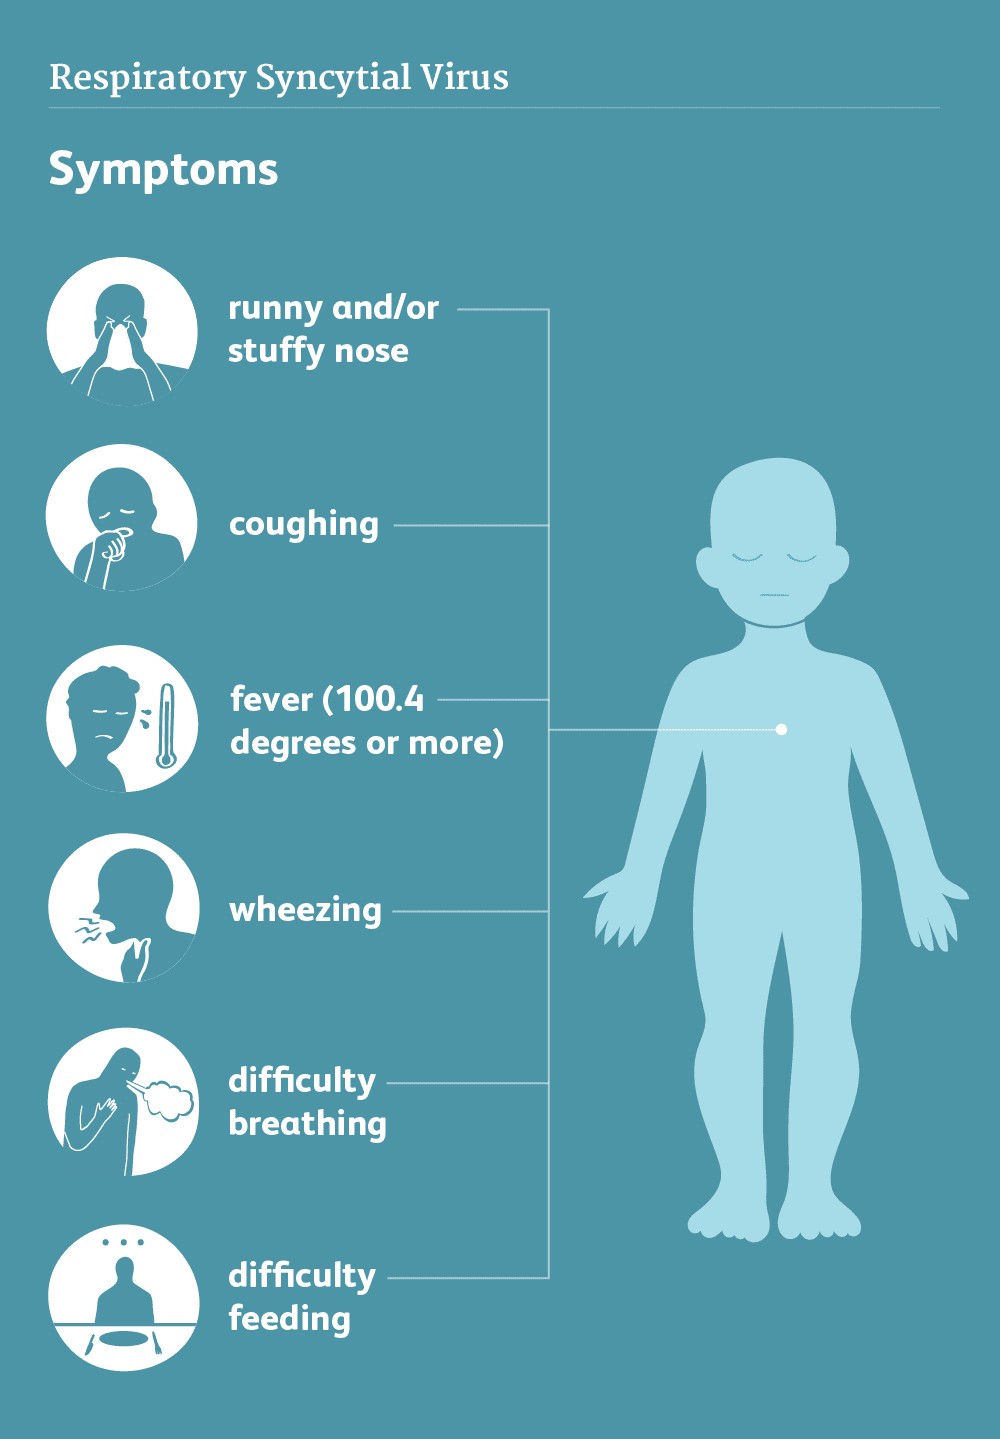 Symptoms of Respiratory Syncytial Virus